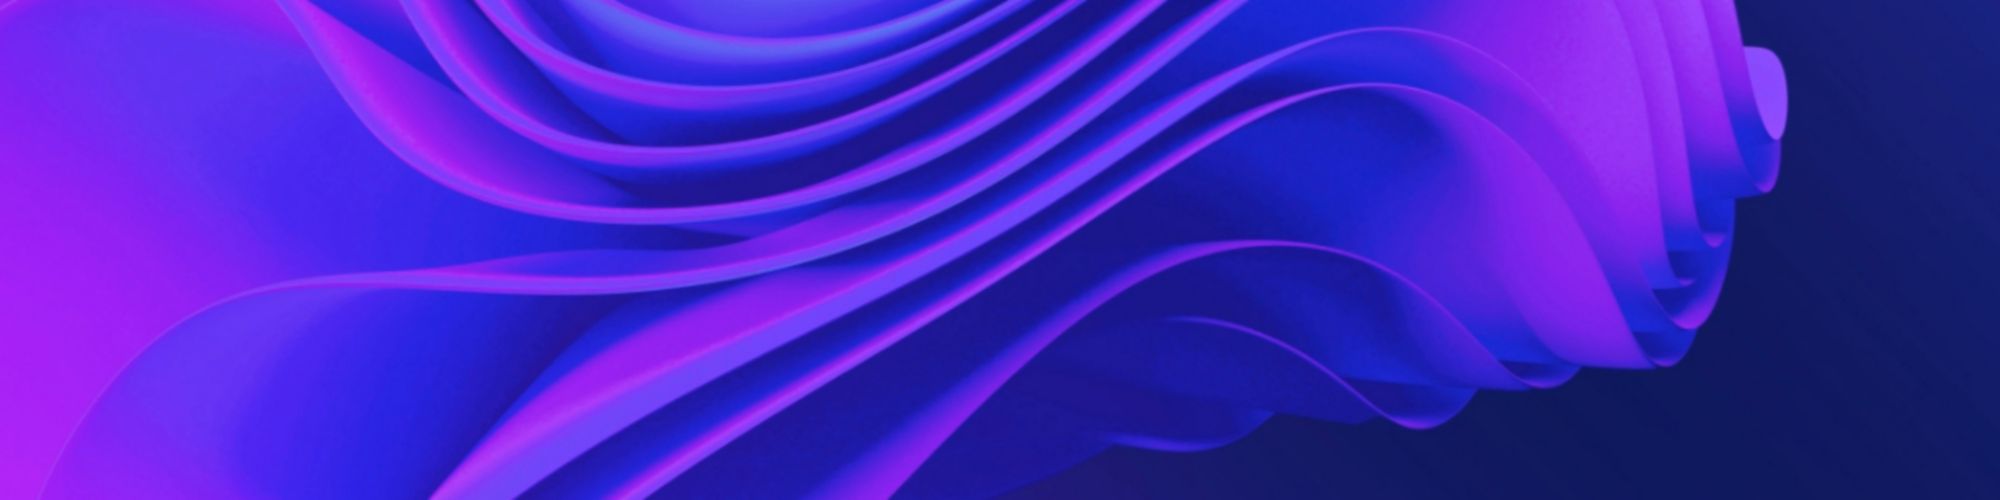 abstract purple wave with a dark background